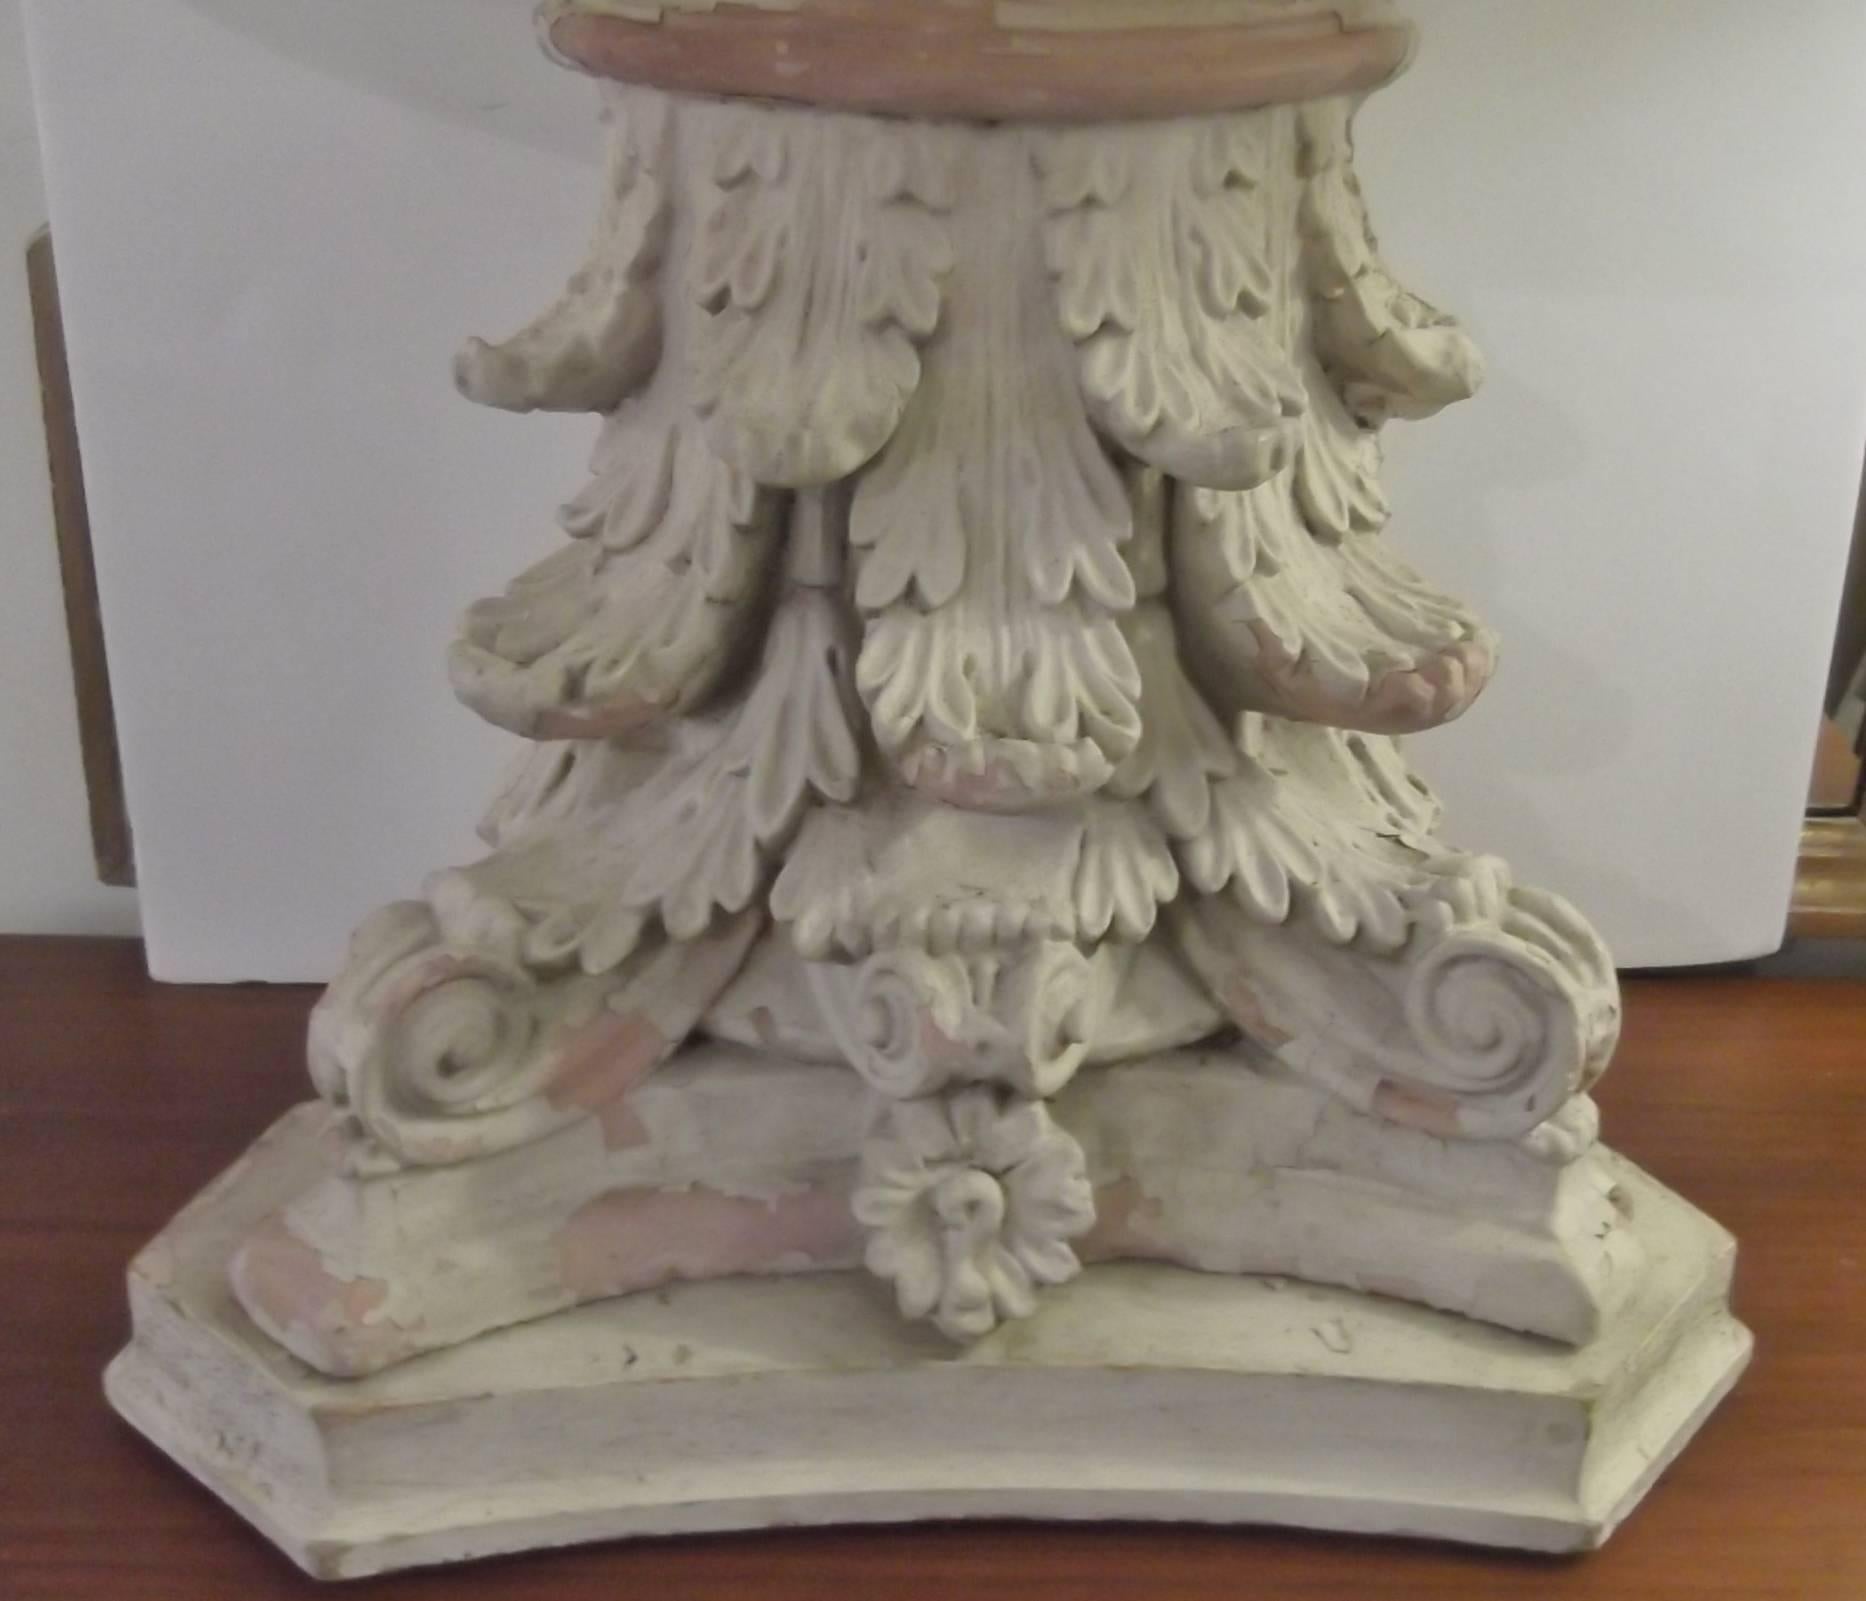 Unusual table lamp made from an architectural remnant from a NYC building. The painted terracotta capitol top is mounted on a wood base and wired as a lamp. The neoclassical capitol was once used to decorate a 19th century building from one of the